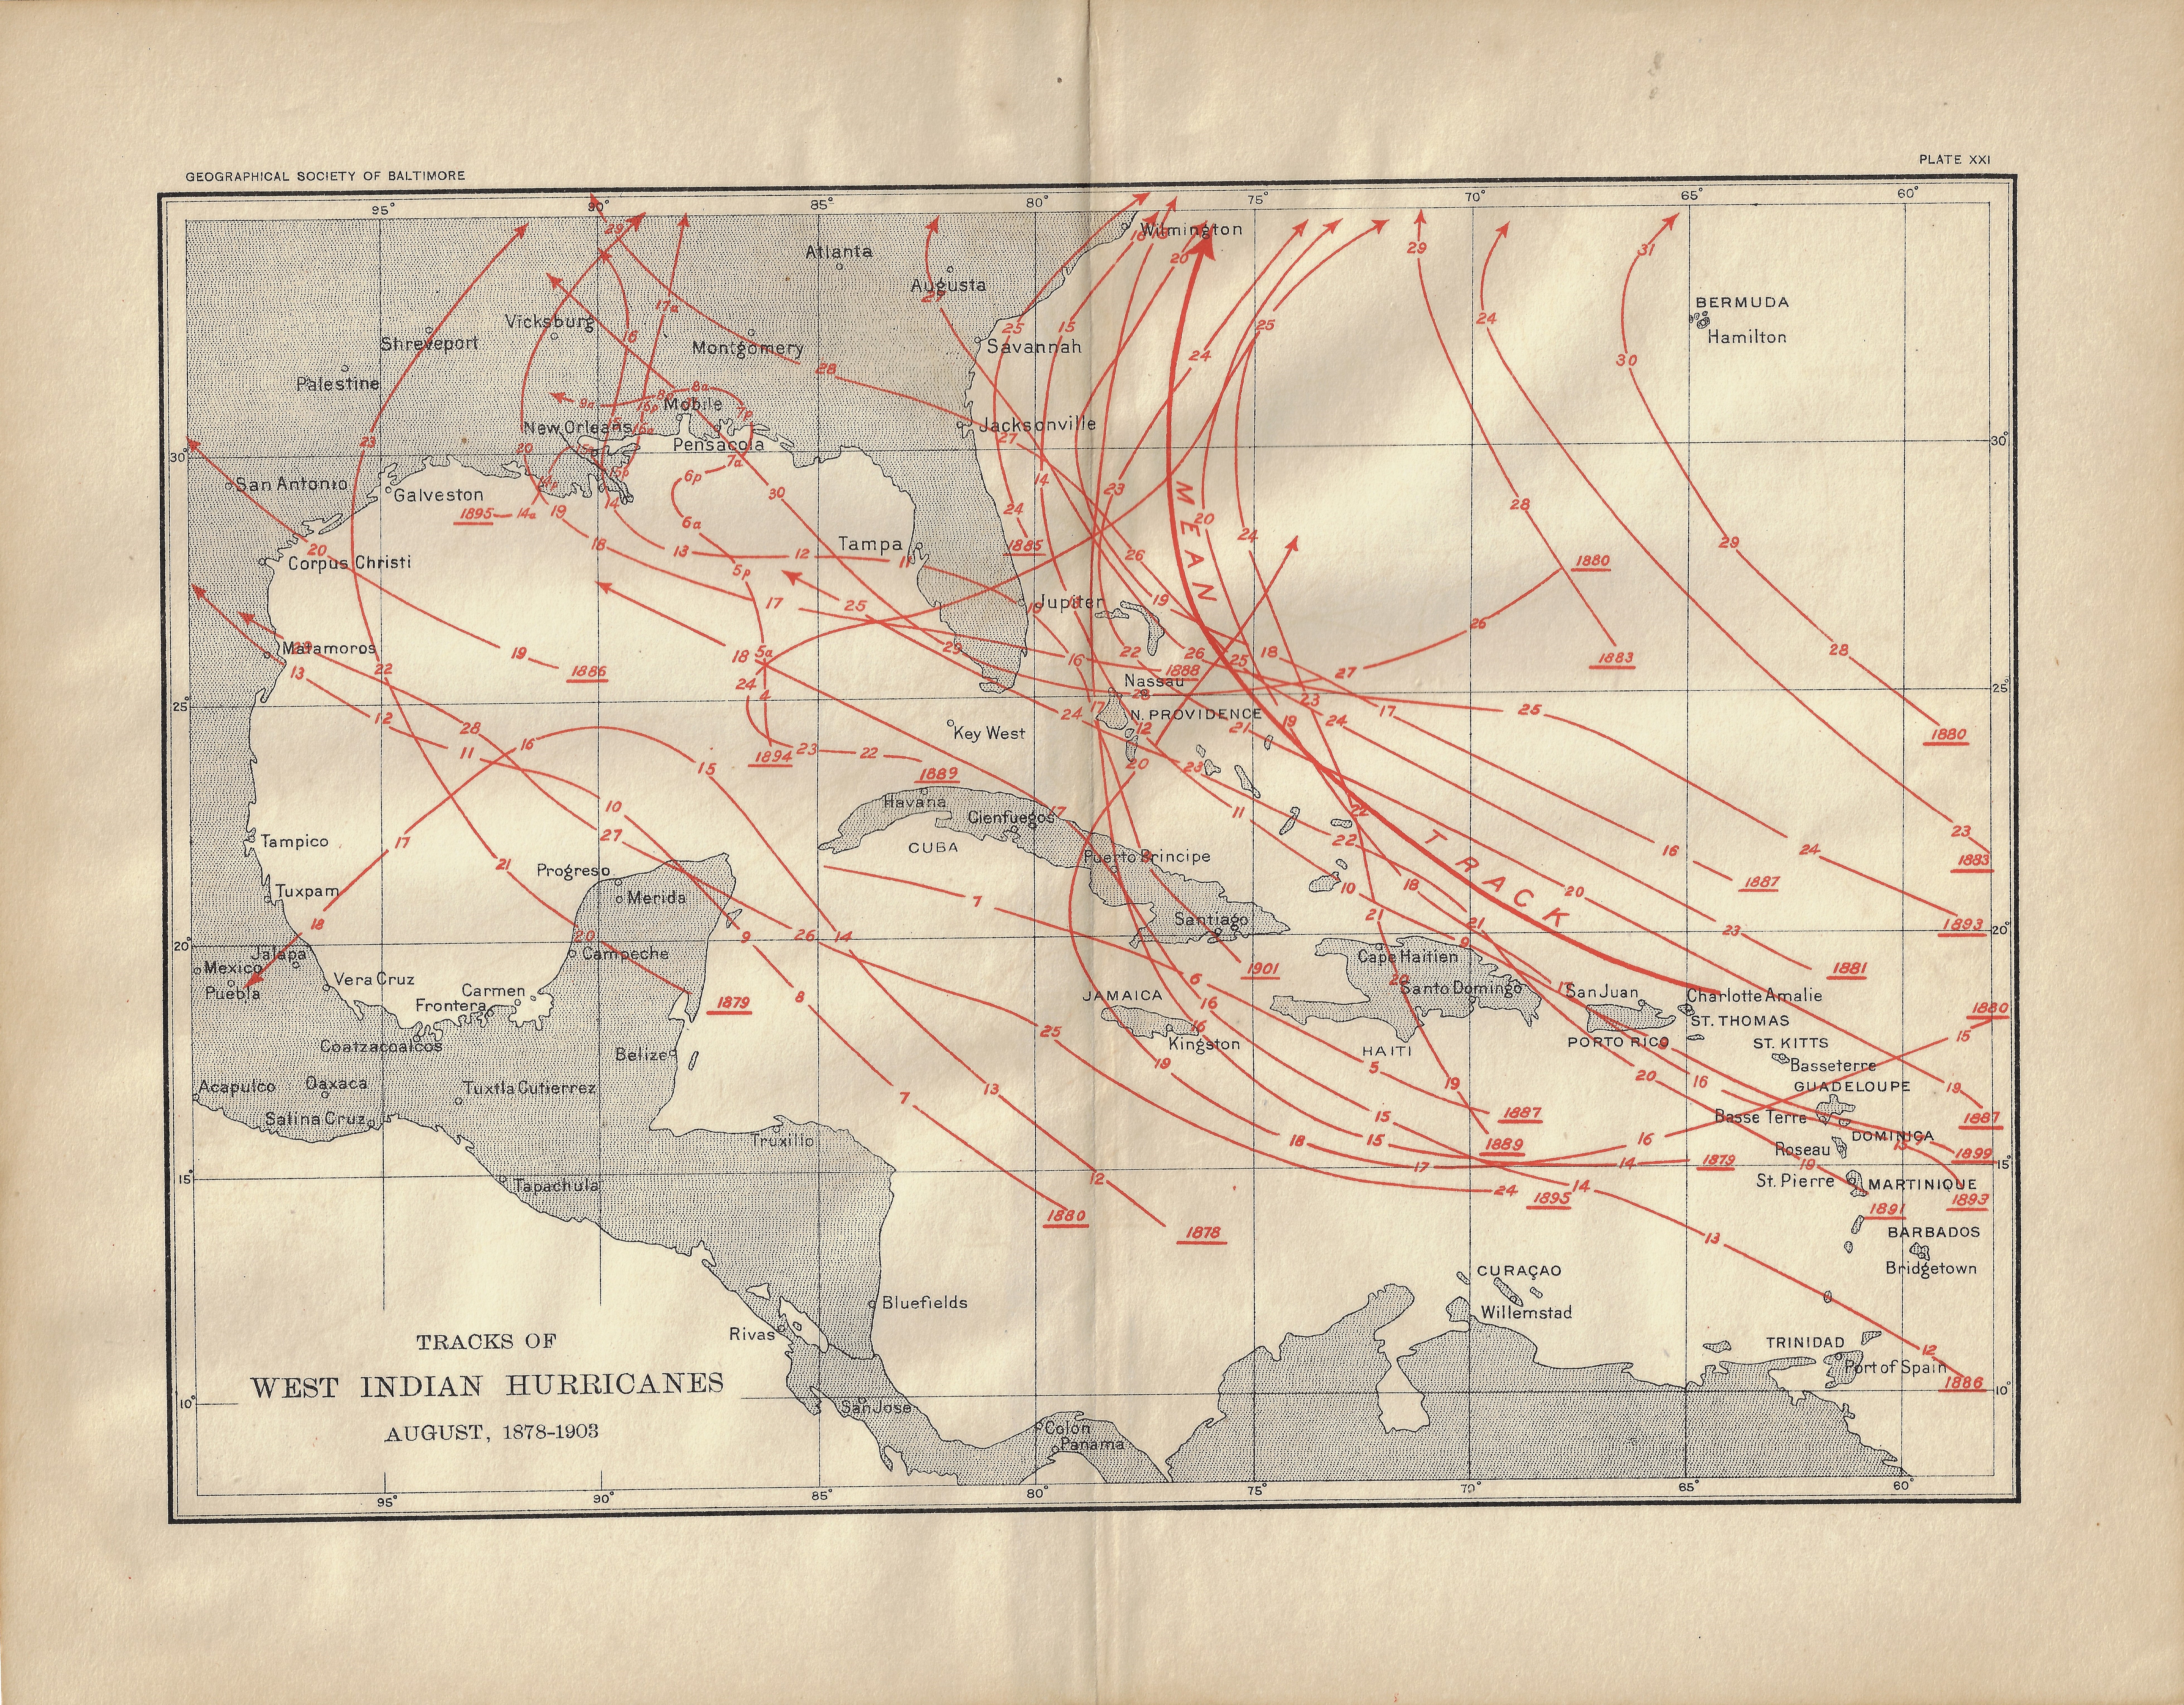 West Indian Hurricanes August 1878-1903